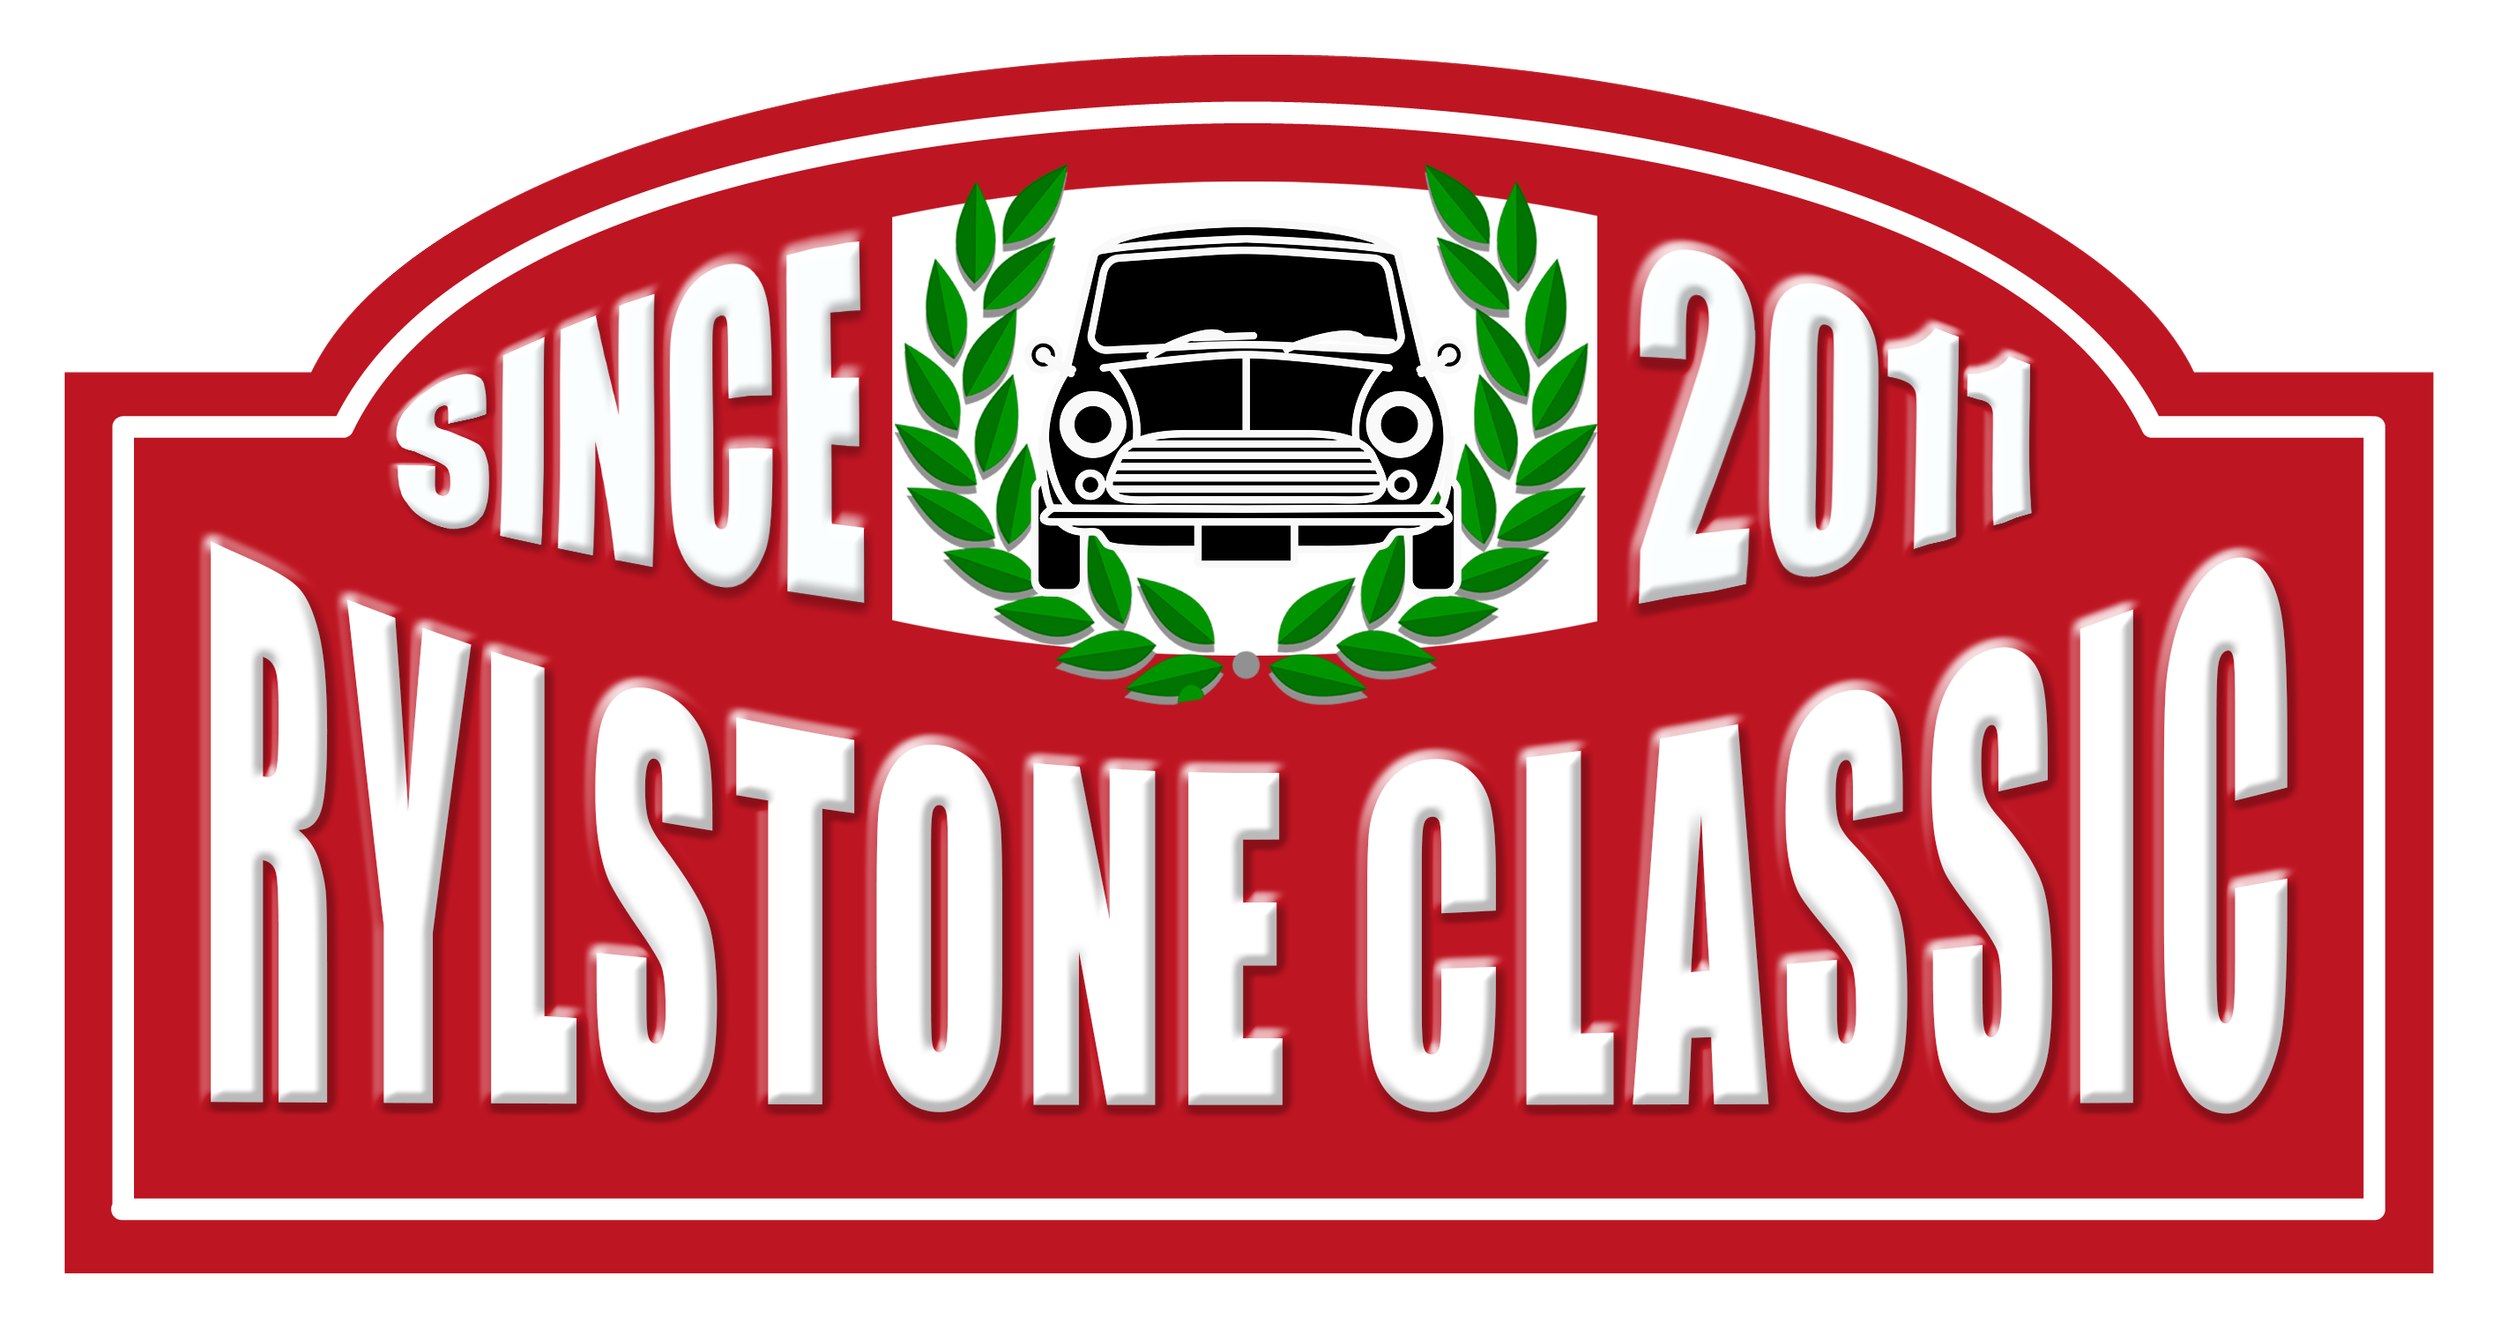 The Rylstone Classic